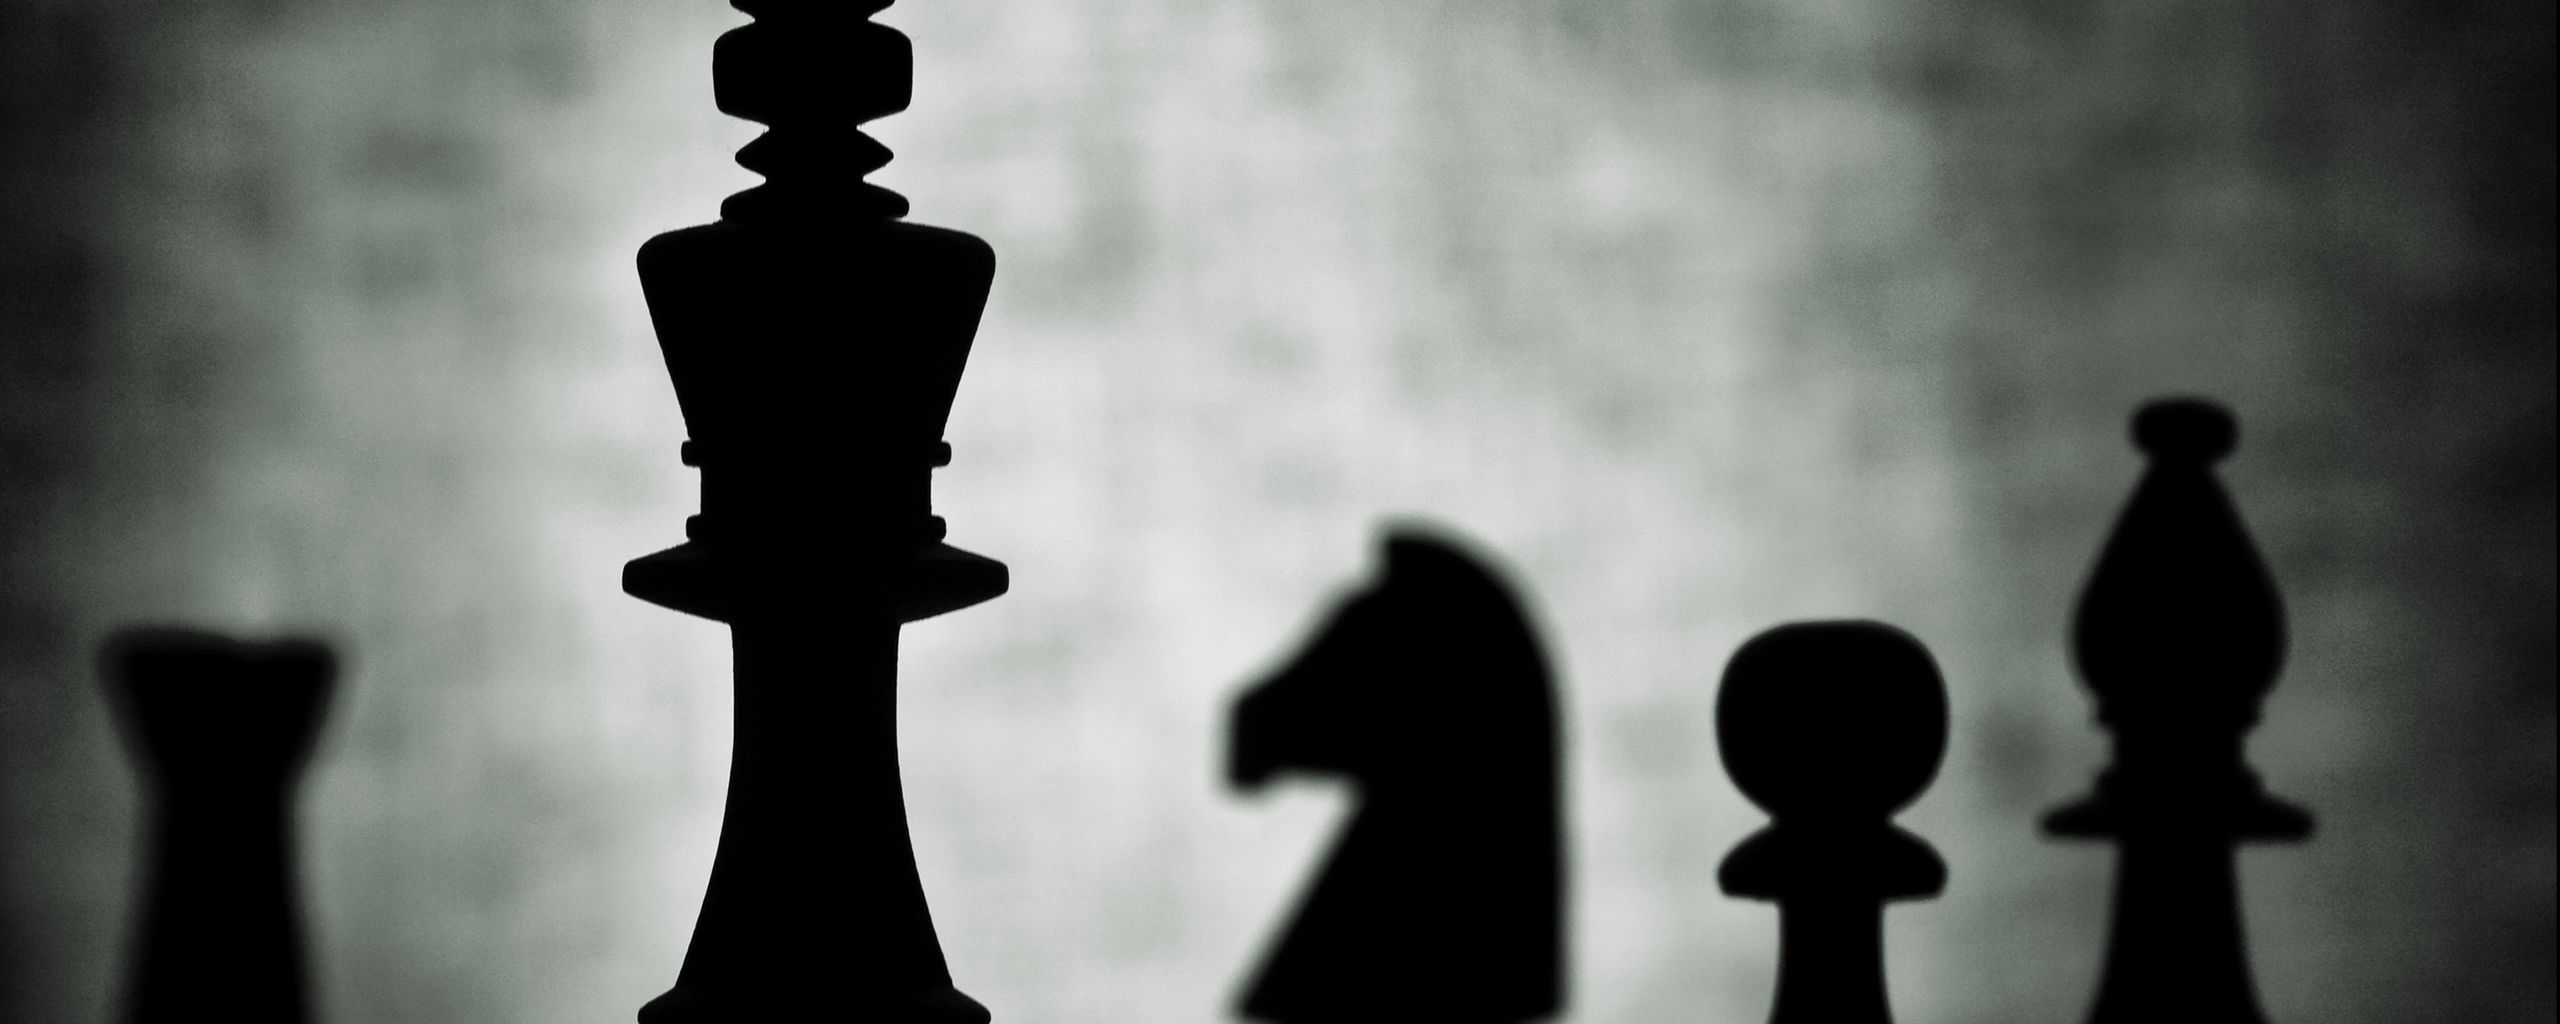 Download wallpaper 2560x1024 chess, figures, dark, game, king ultrawide monitor HD background